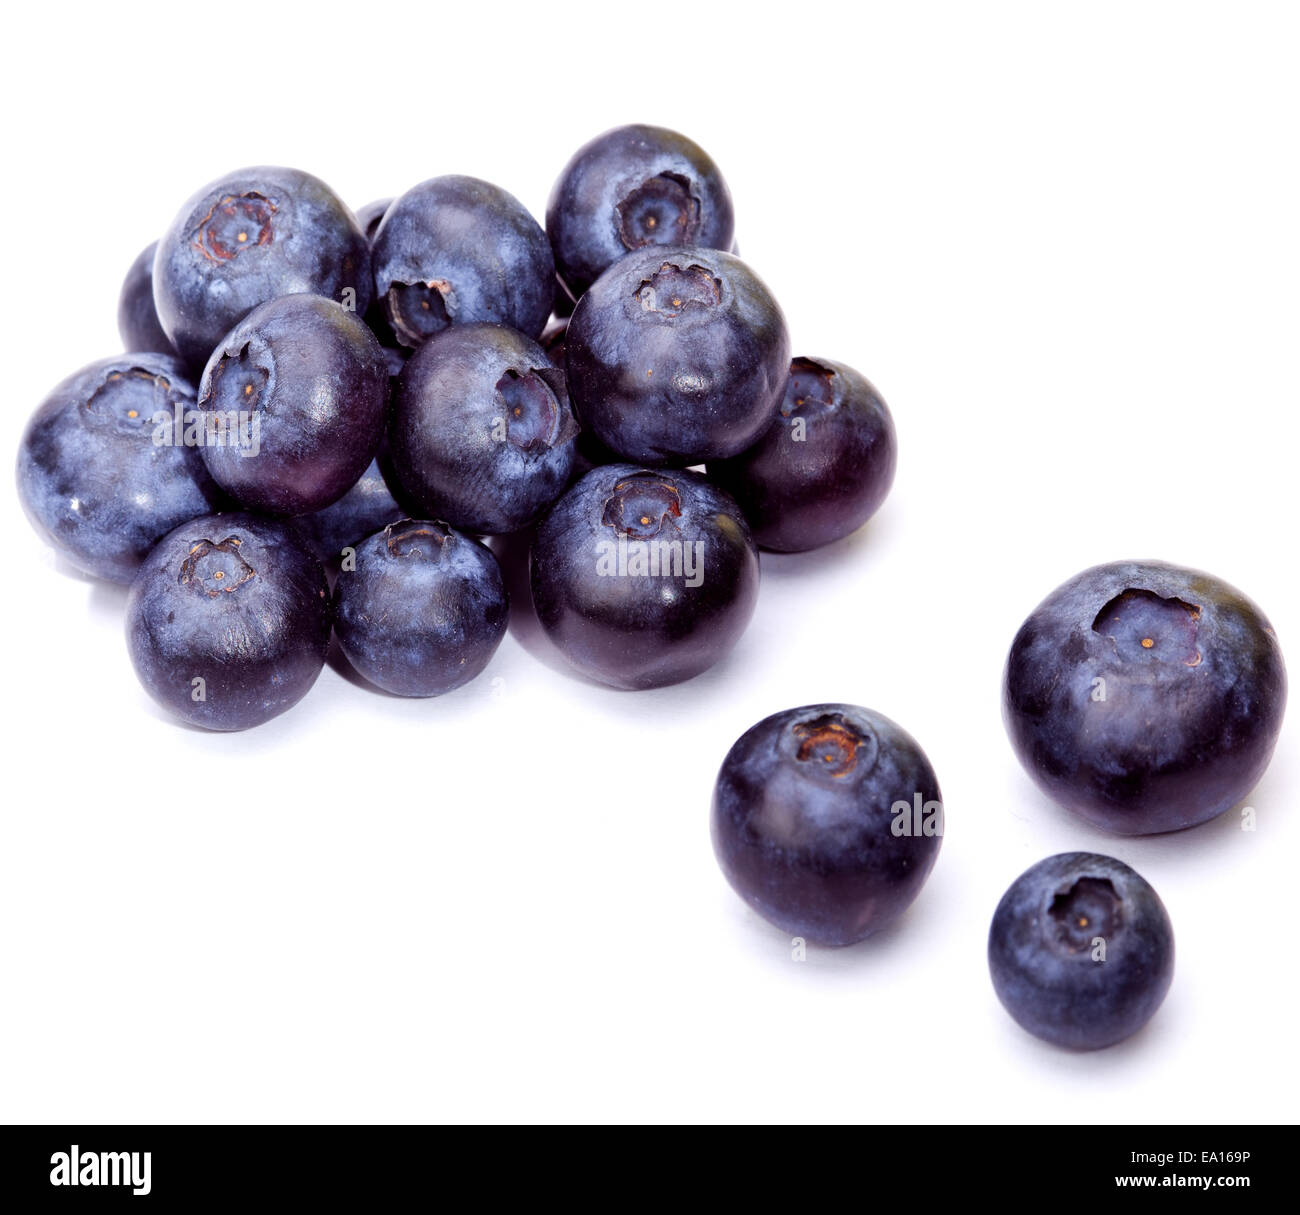 Berries of a bilberry Stock Photo